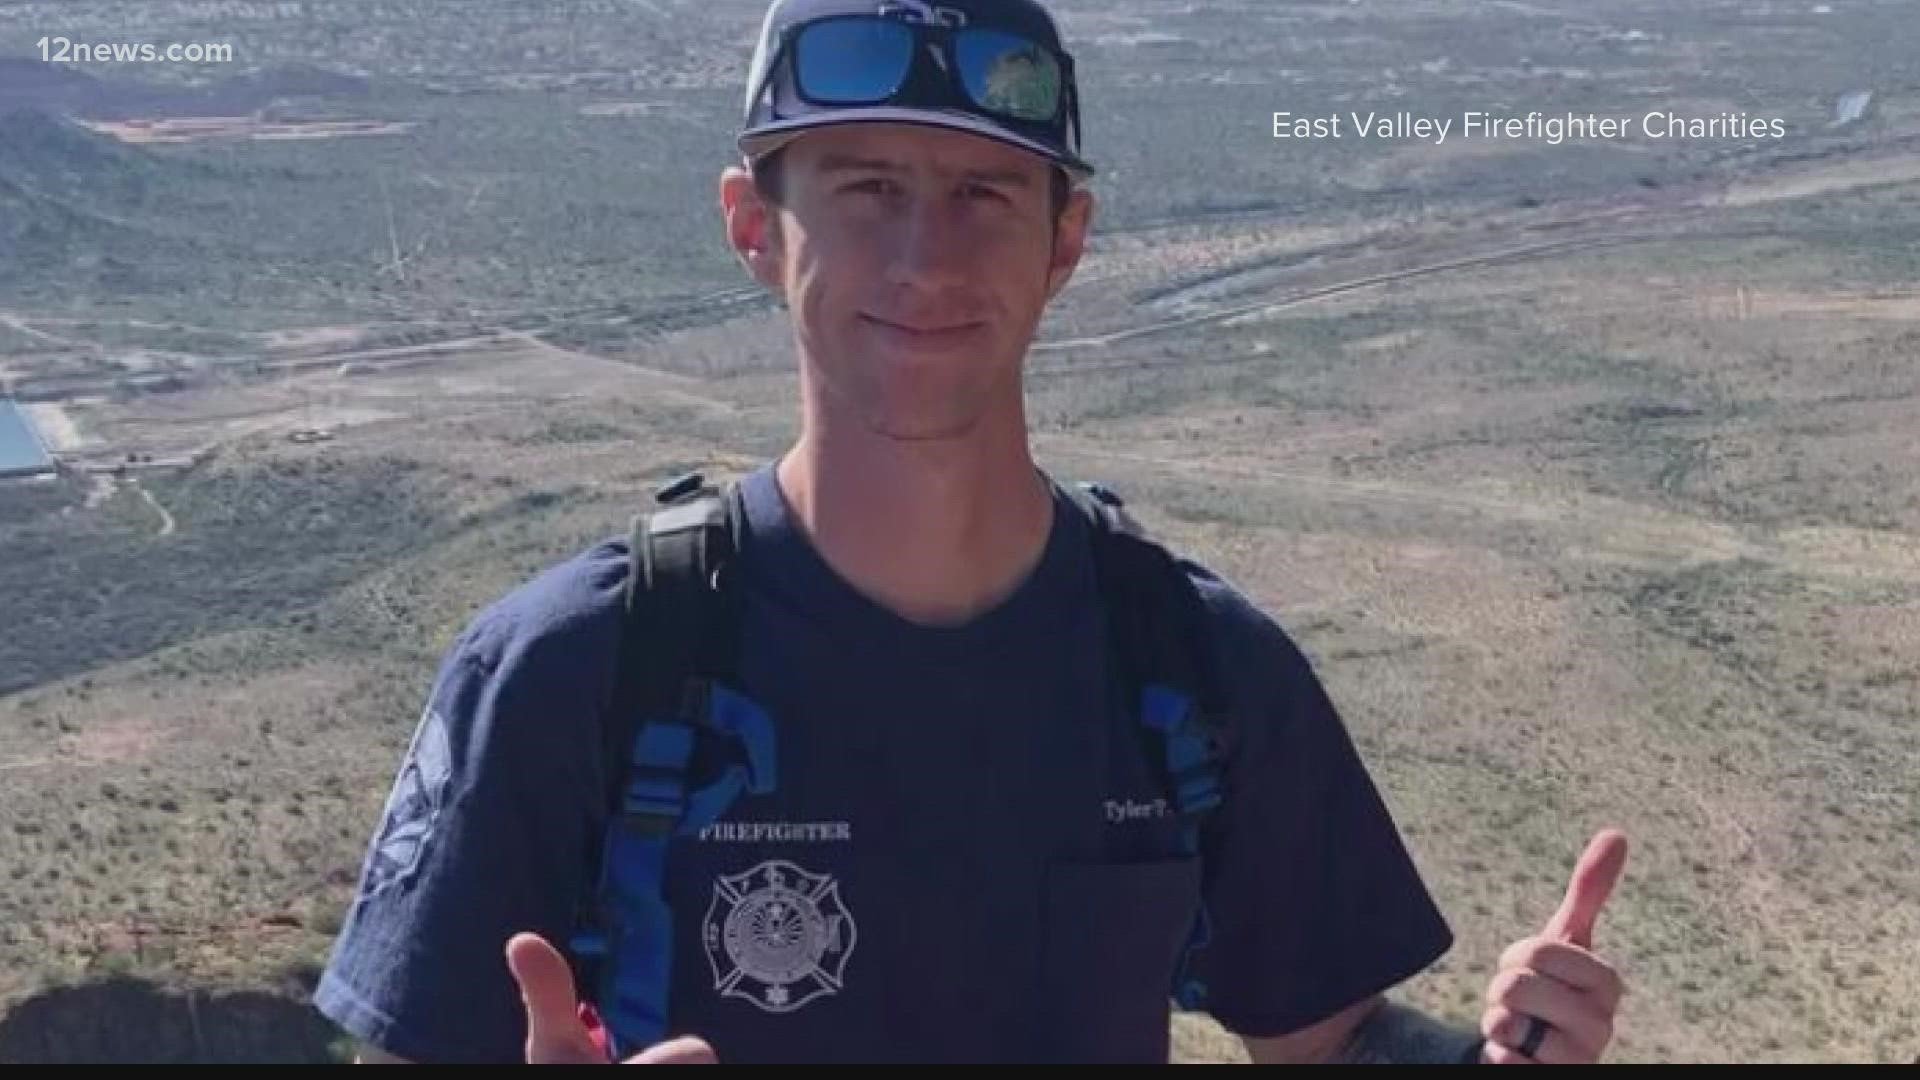 Tyler Packer was injured in the crash of State Route 87 and Firefighter/EMT Brendan Bessee was killed when their ambulance collided with a semi-truck Friday.